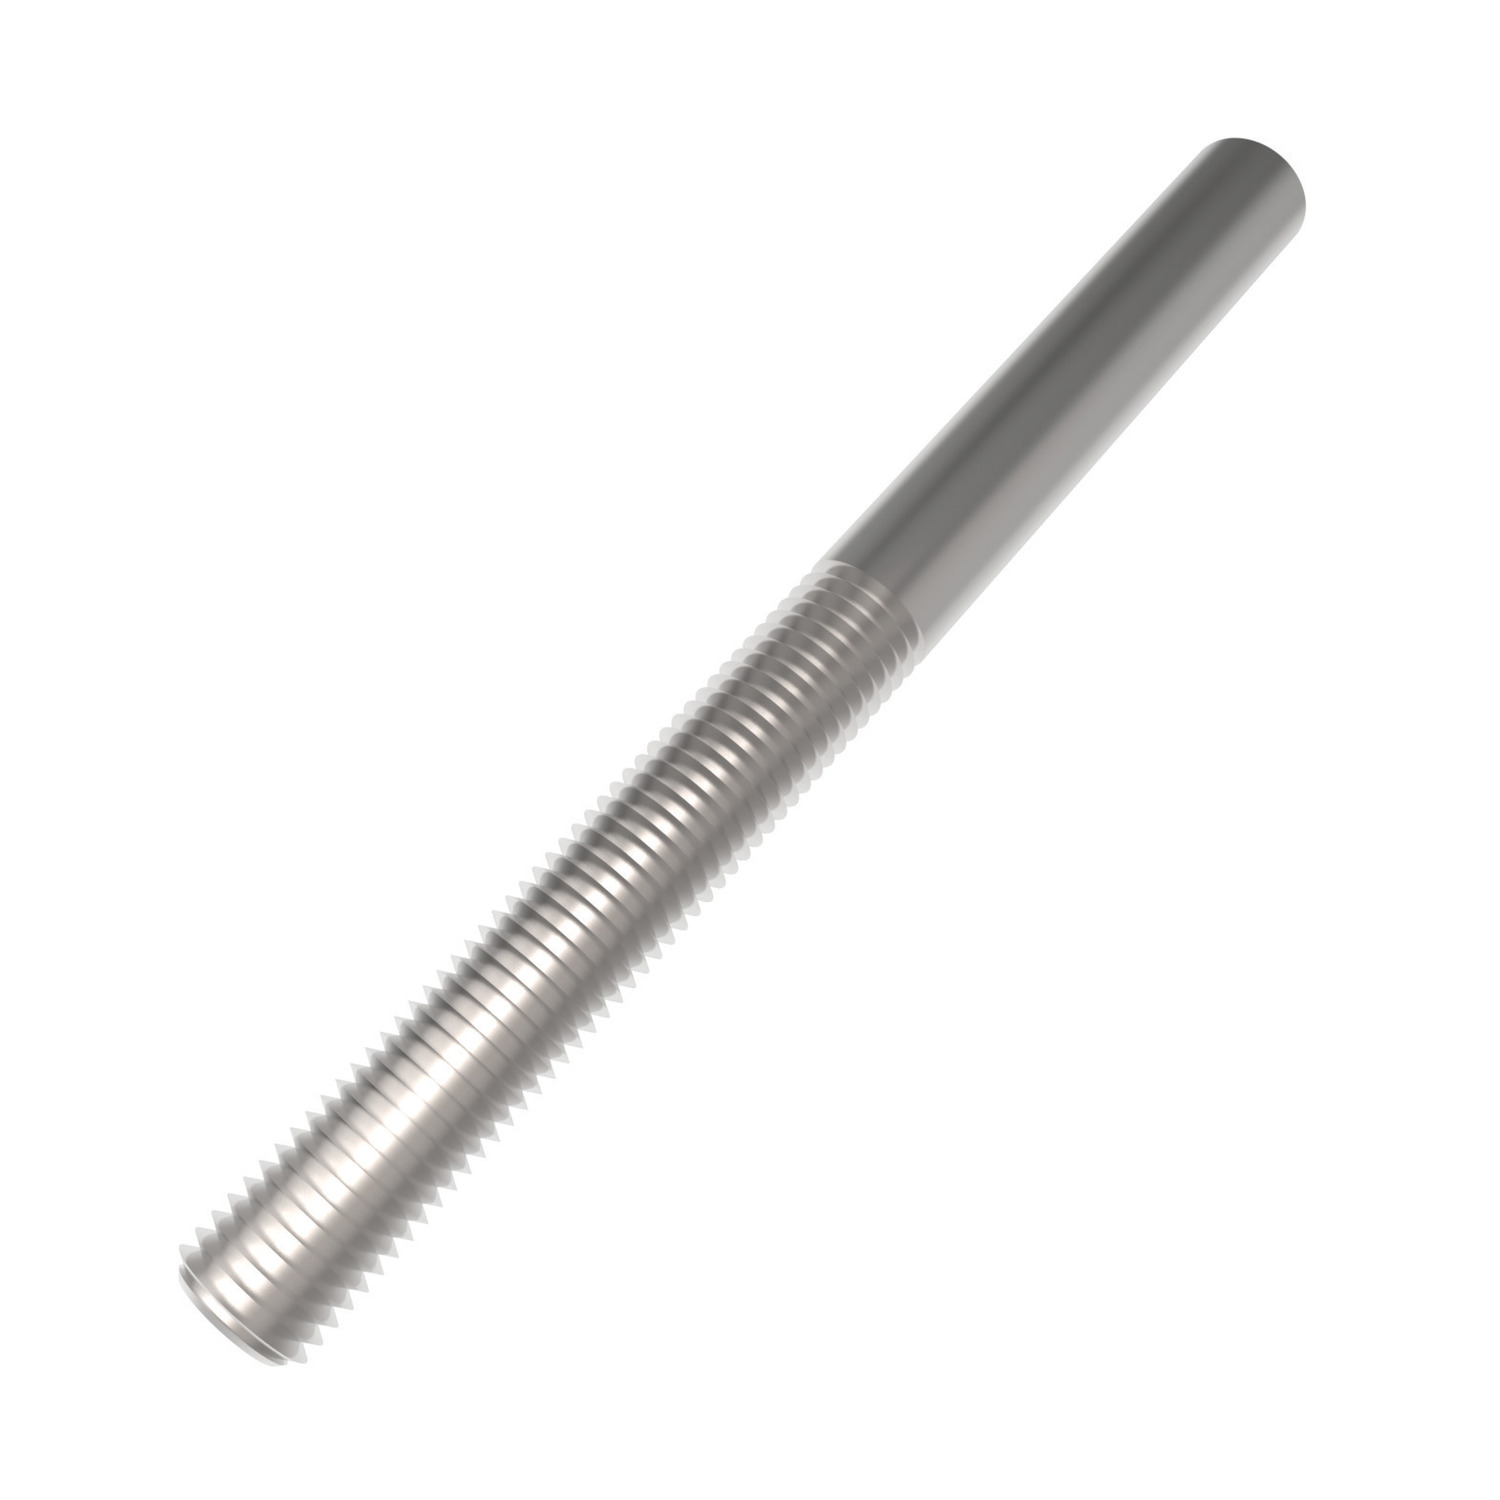 R3866.R016-ZP Welding Studs steel RH M16 Not to be used for lifting unless SWL marked.